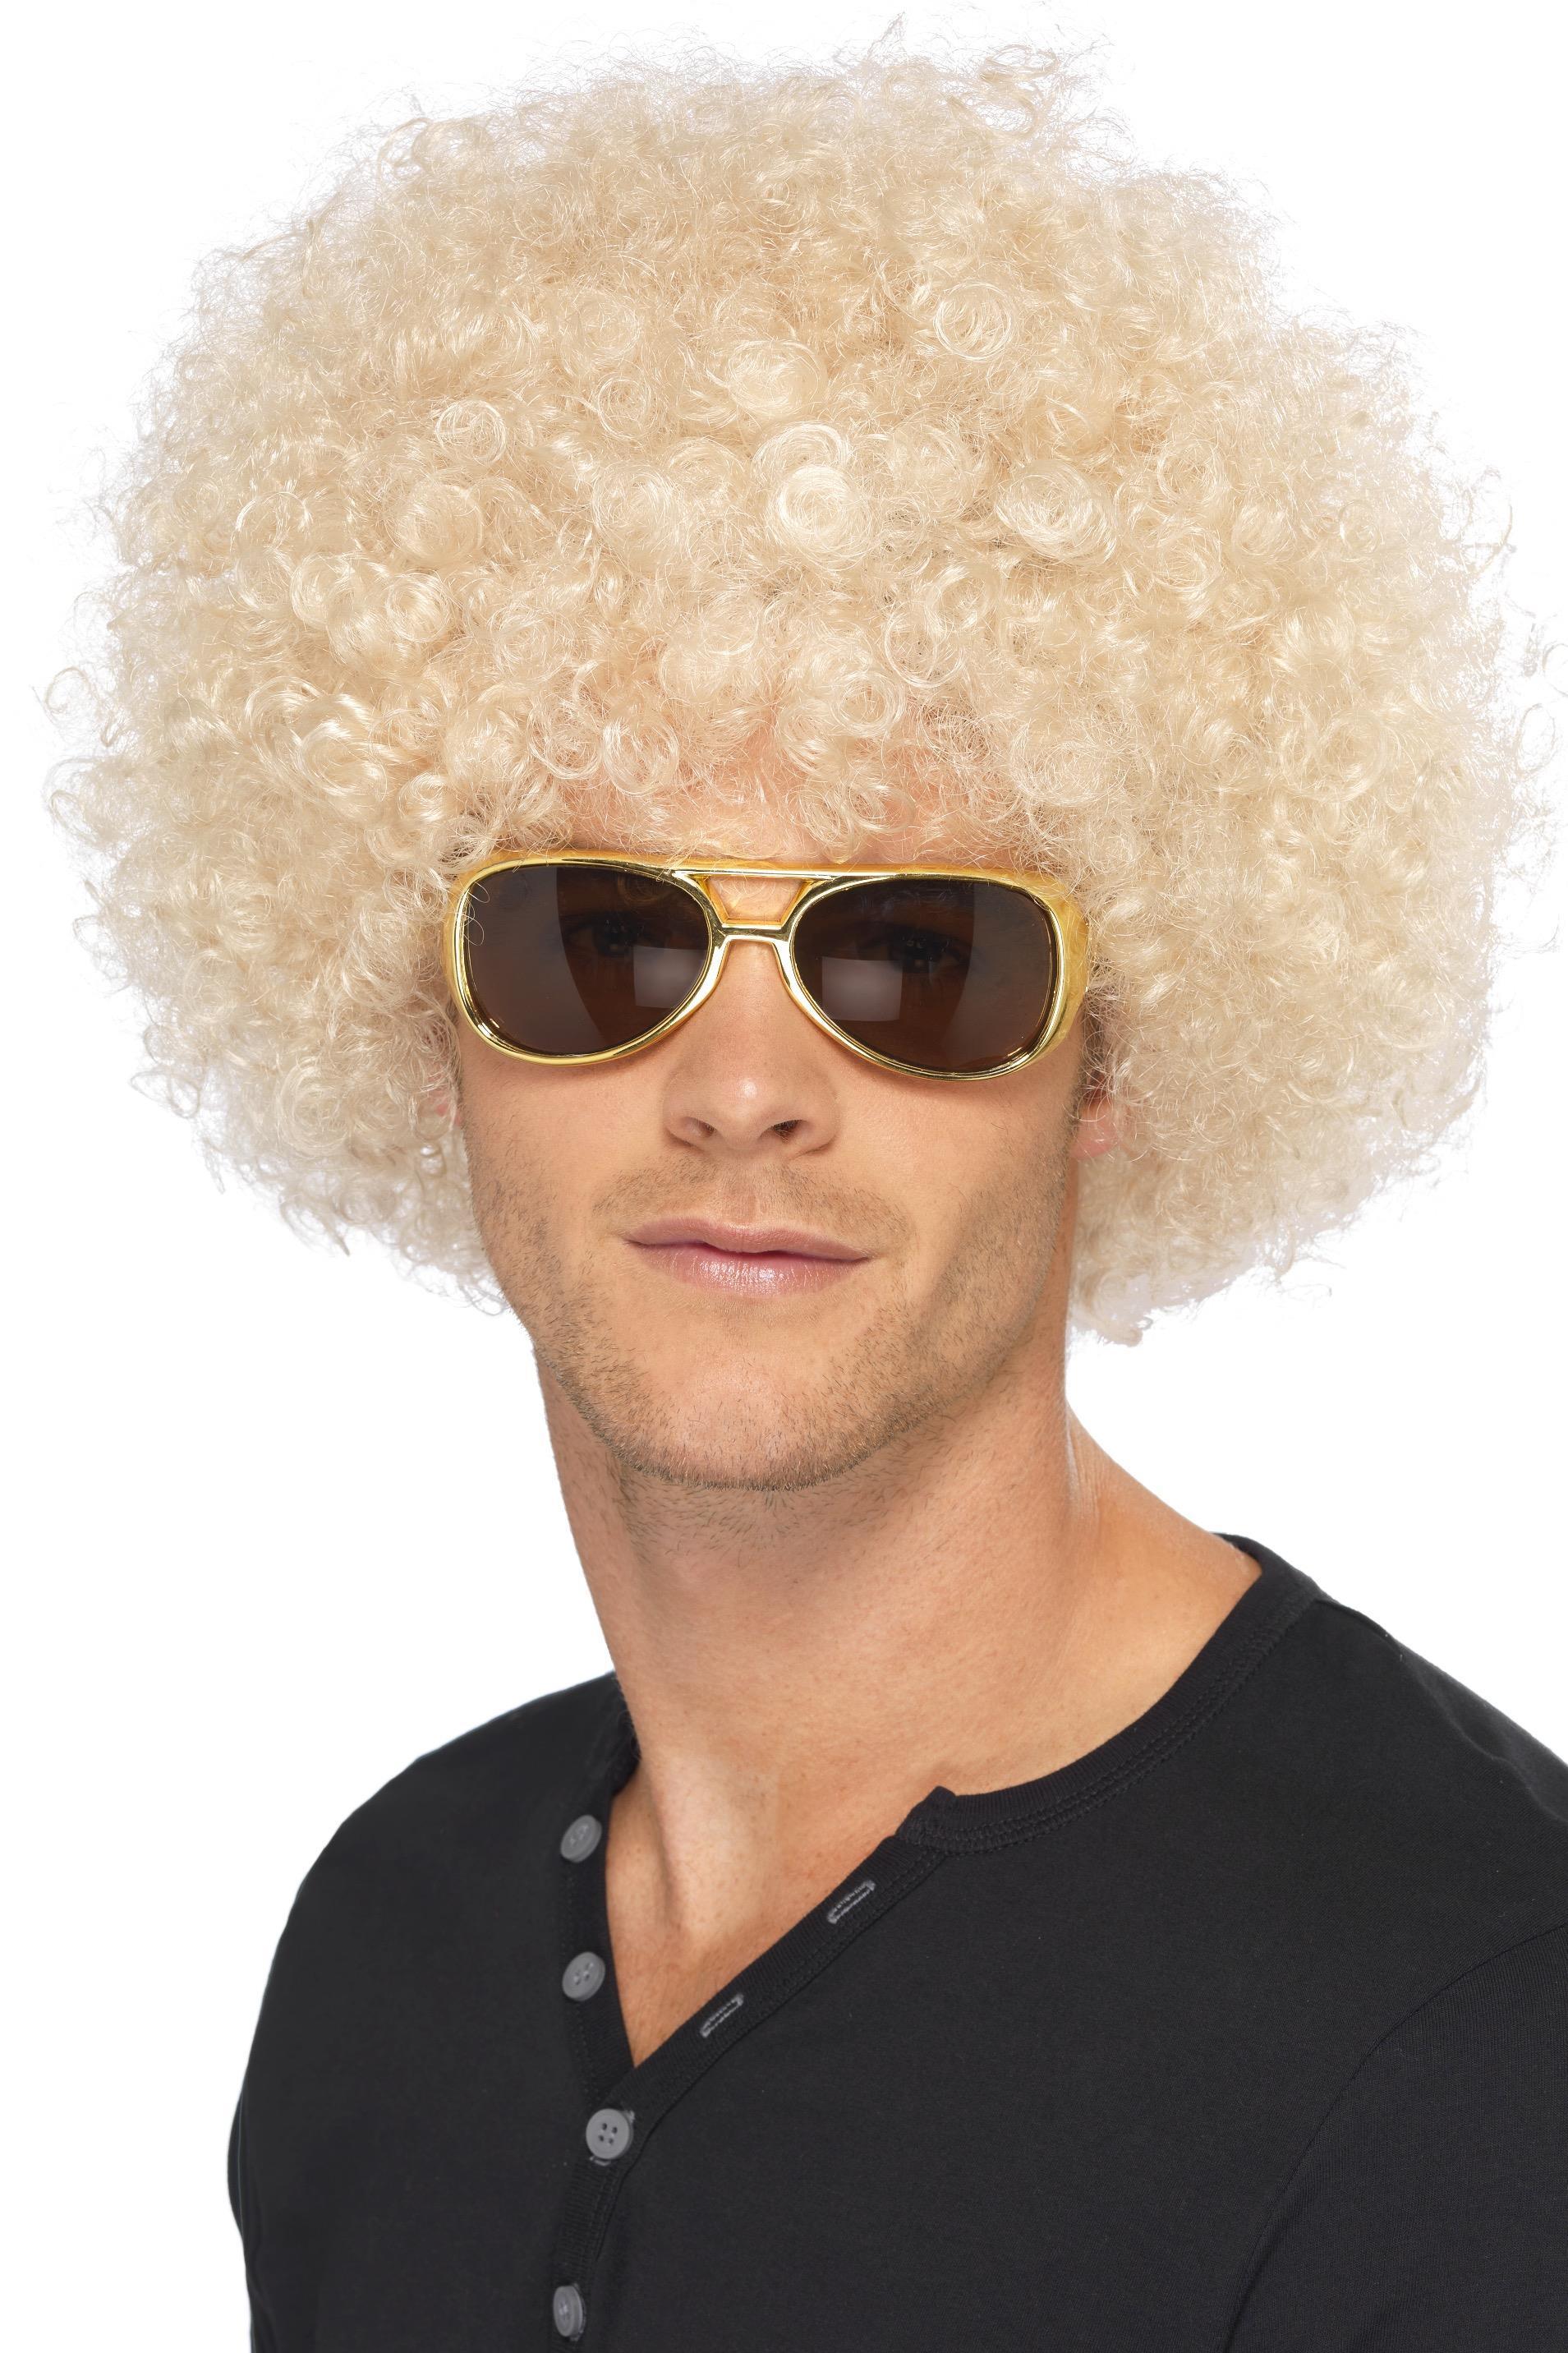 70s Funky Afro Wig Blonde